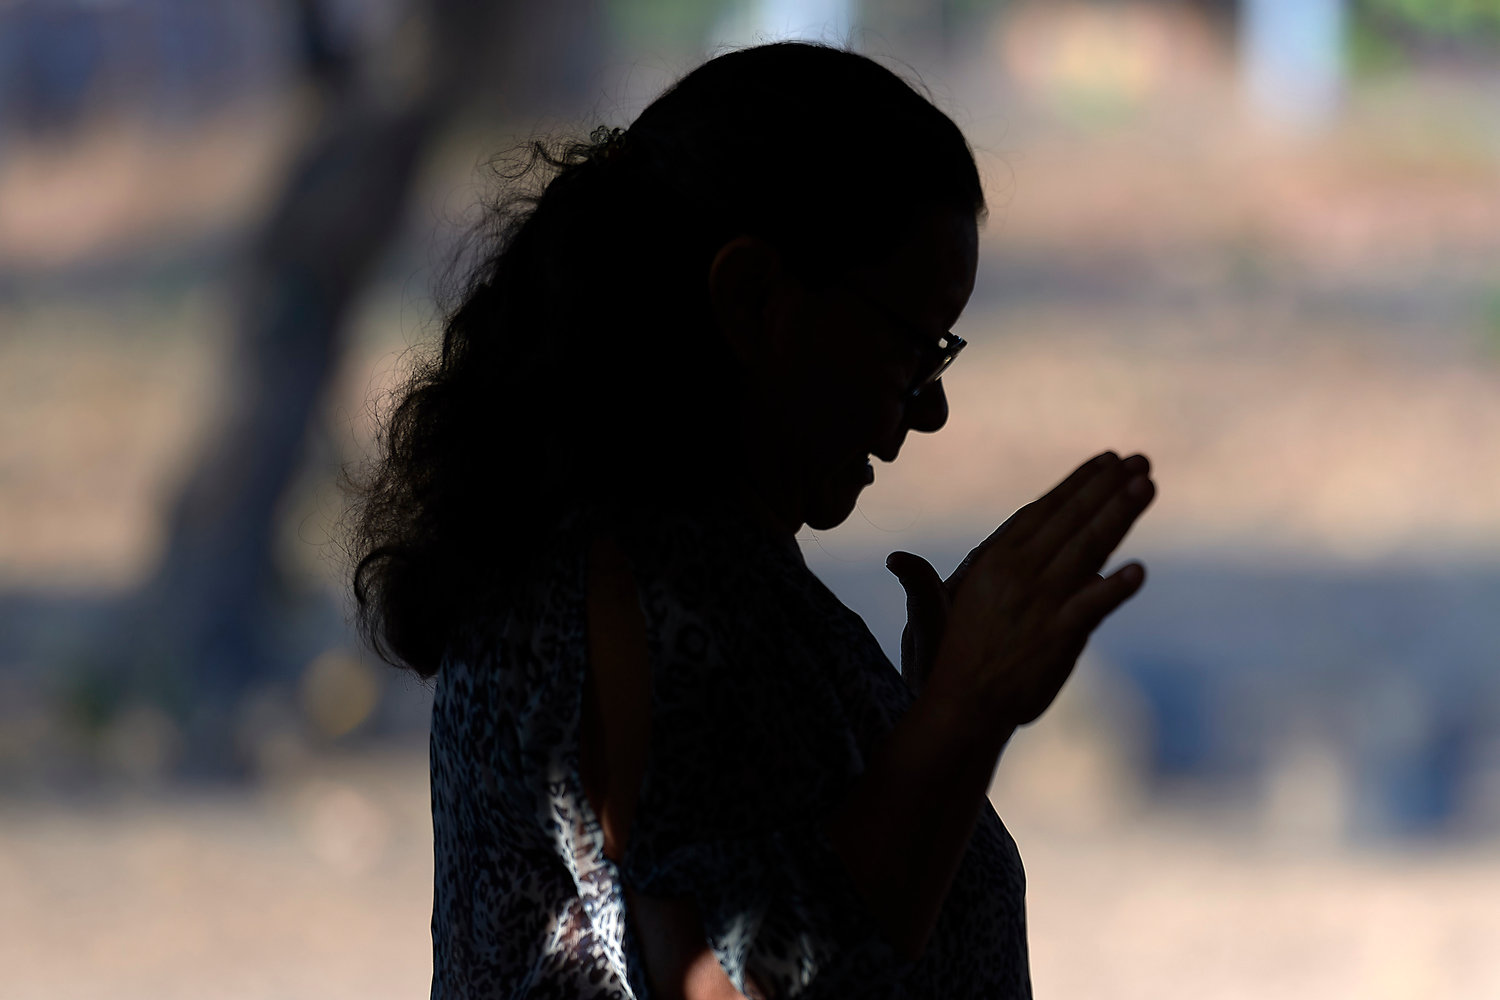 A woman prays during Mass April 6, 2019, in St. Ignatius, Guyana. Franciscan Father Joao Messias Sousa, who works among indigenous in the Amazon, said the people believe “God is in all things, but those things are not gods.”